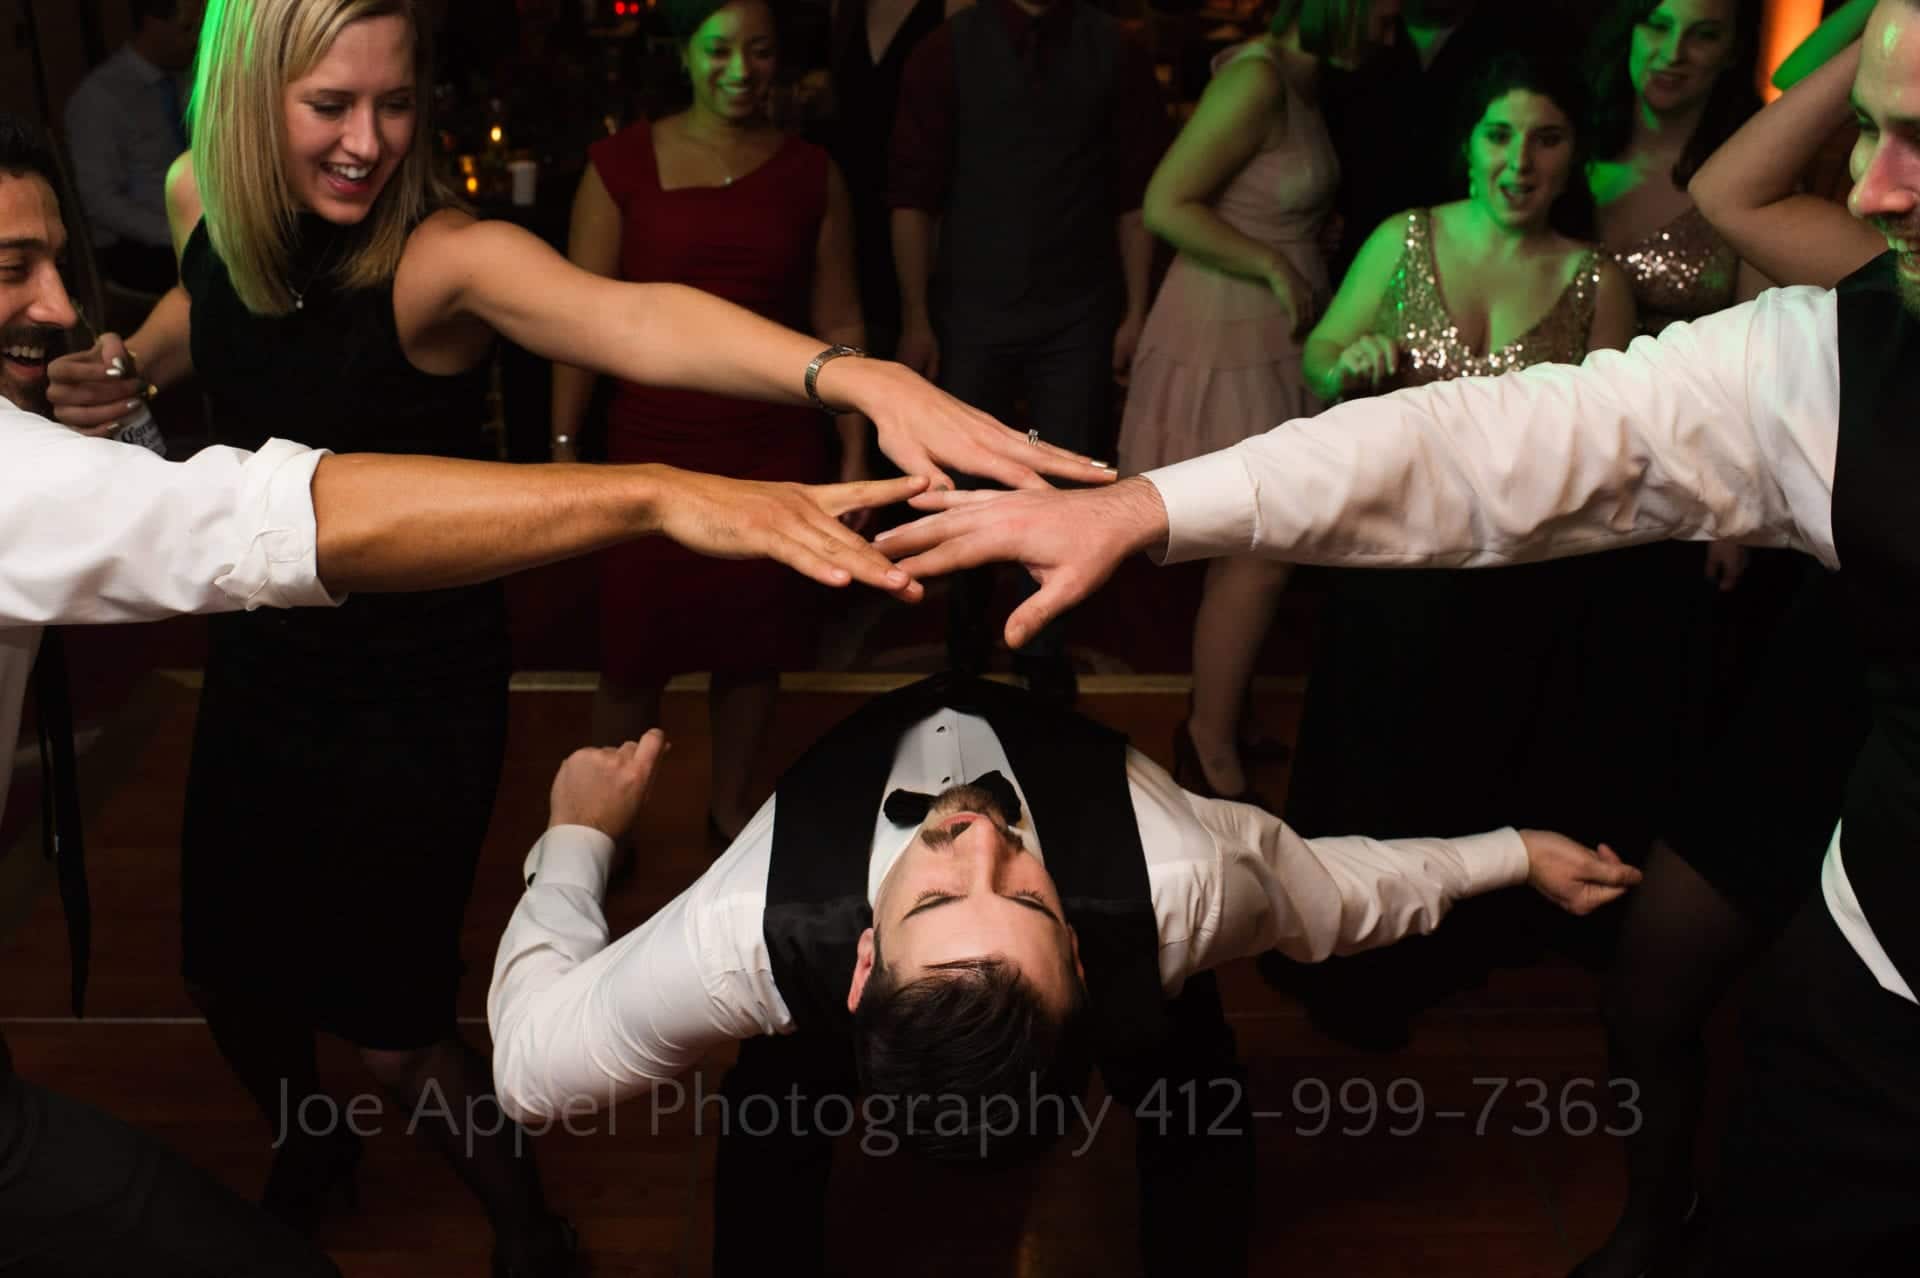 Three people hold their hands out as a man wearing a black vest and bow tie limbo dances beneath them.